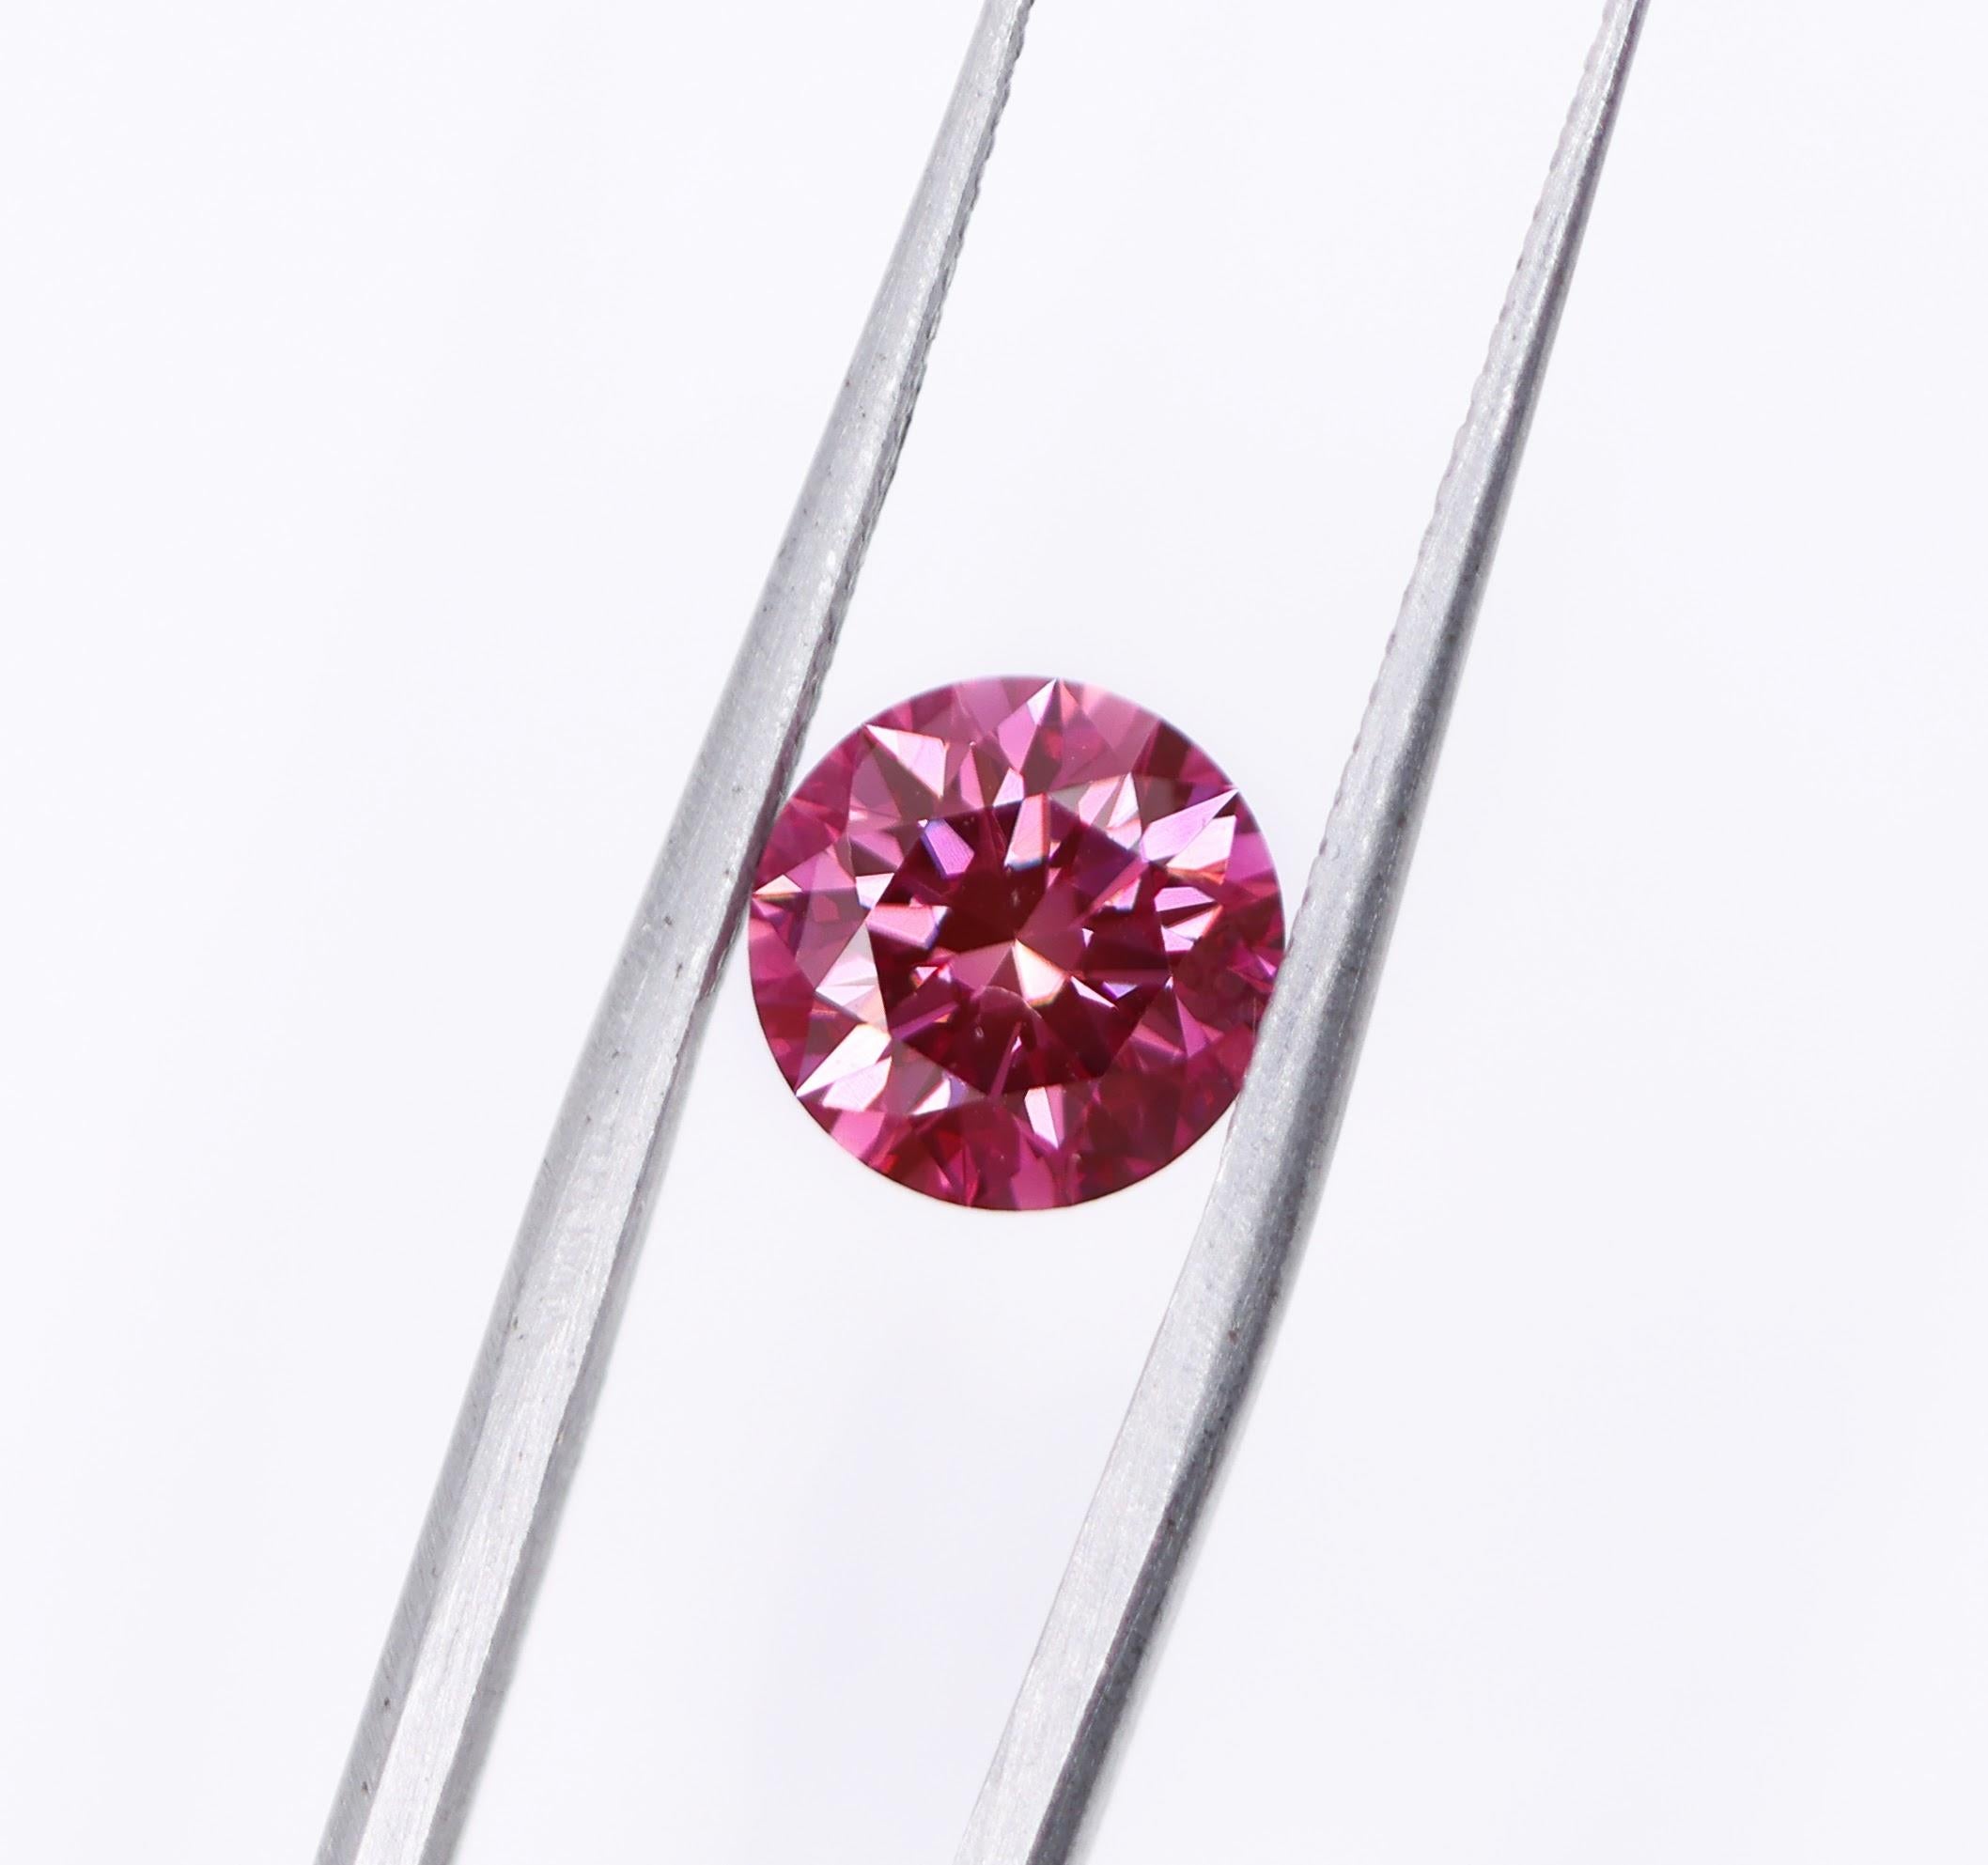 We are thrilled to bring you this absolutely gorgeous pink natural earth mined diamond! This diamond is HPHT treated, giving it a stunning purplish pink color. A fabulous size for an engagement ring or statement piece that is sure to turn heads.